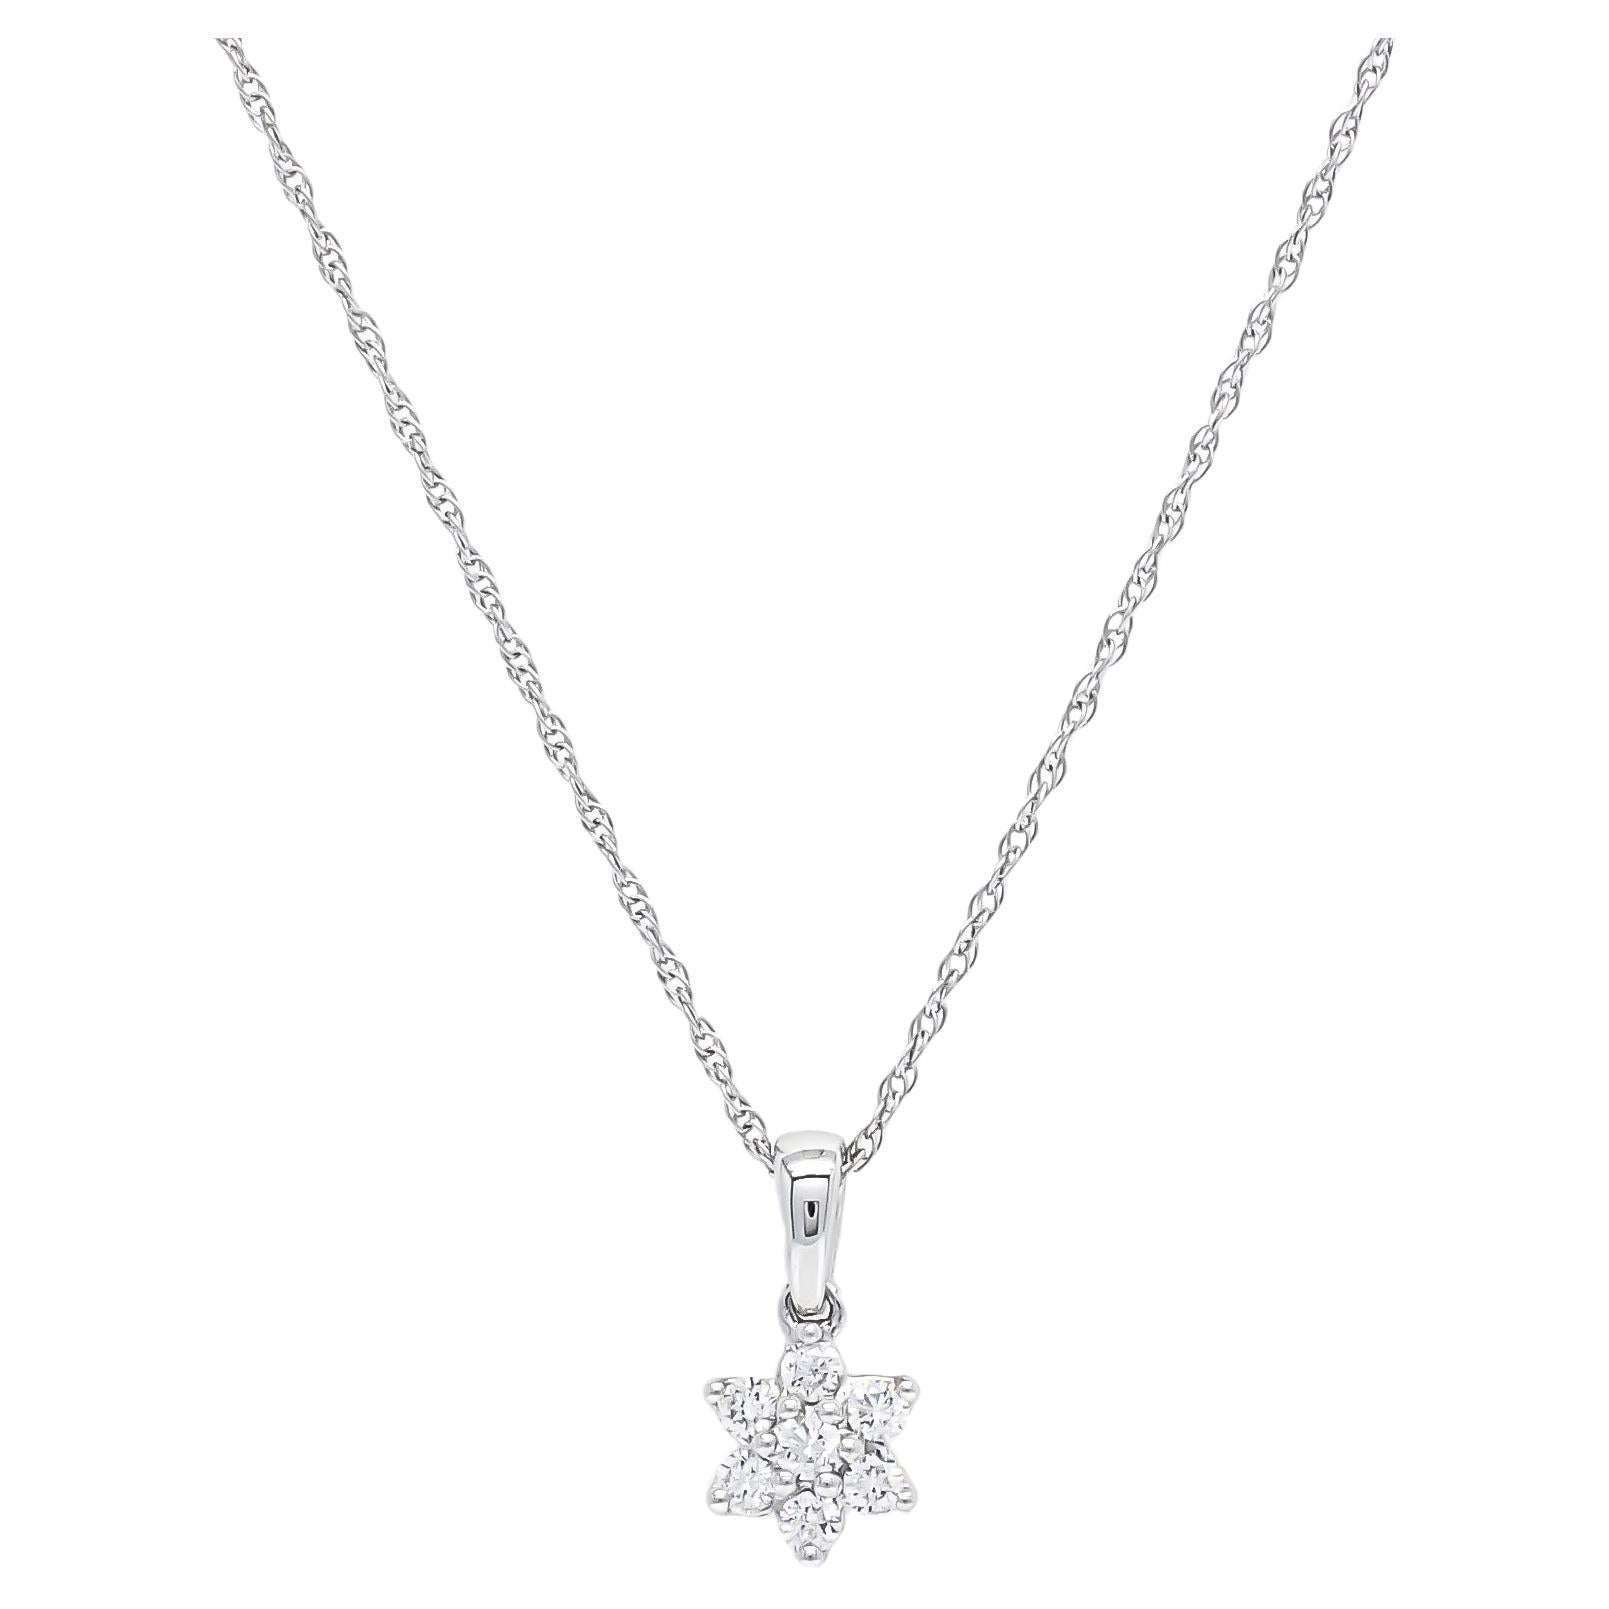 Natural Diamond 0.16 carats 18KT White Gold Flower Pendant Chain Necklace